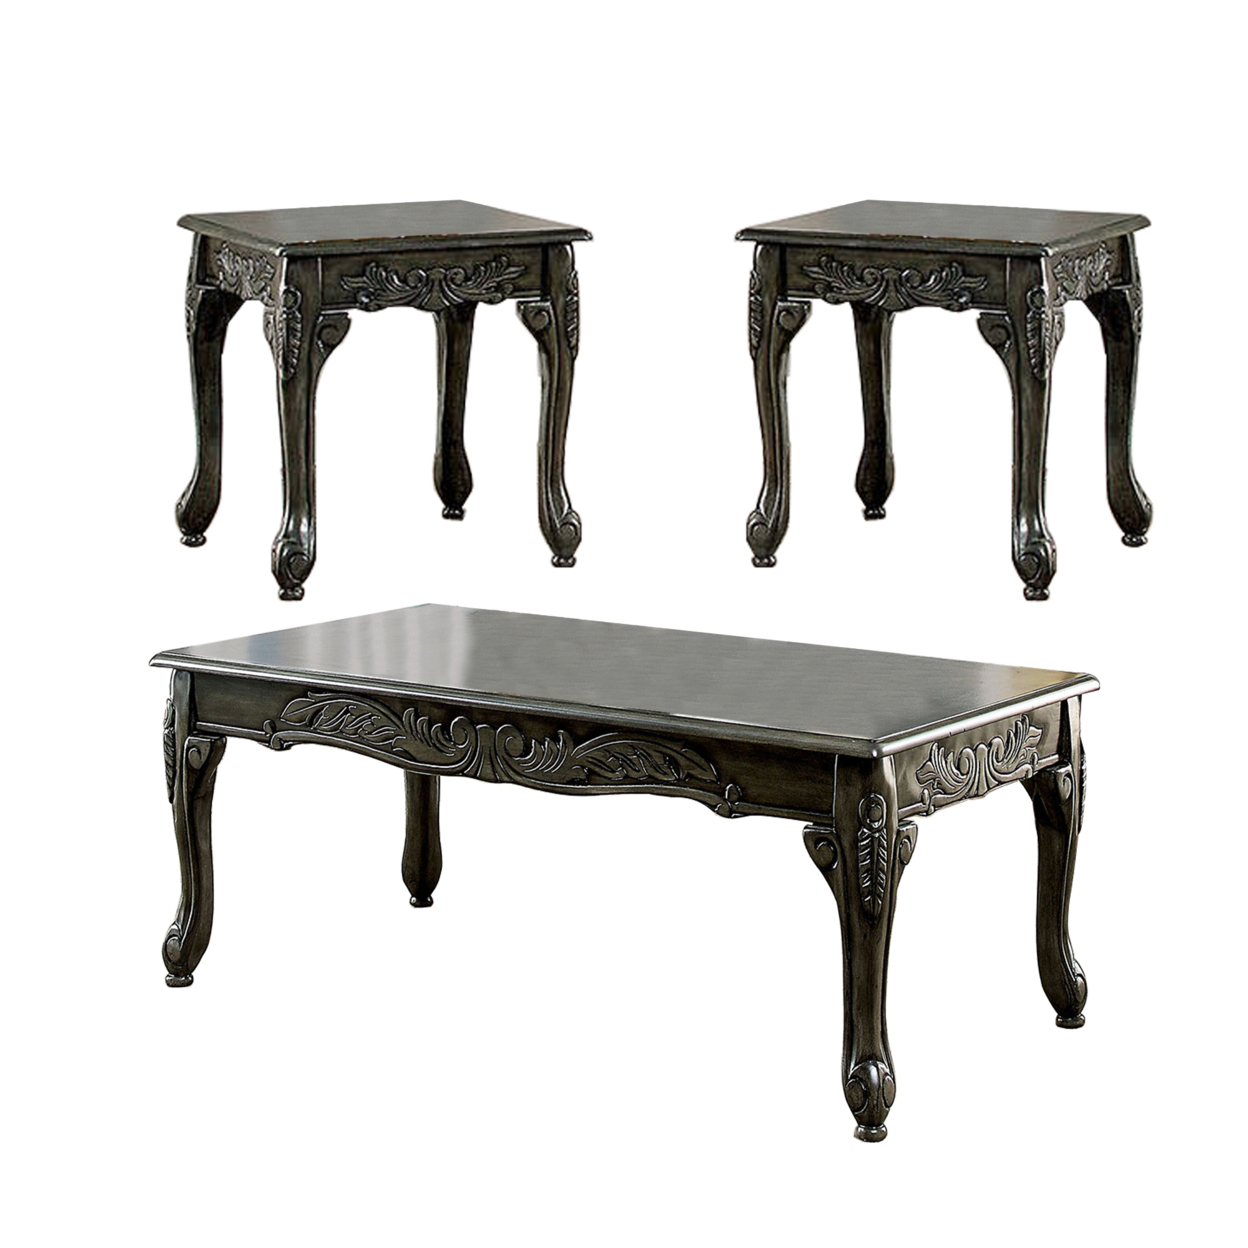 3 Piece Table Set With Cabriole Legs And Wooden Floral Motifs, Gray- Saltoro Sherpi